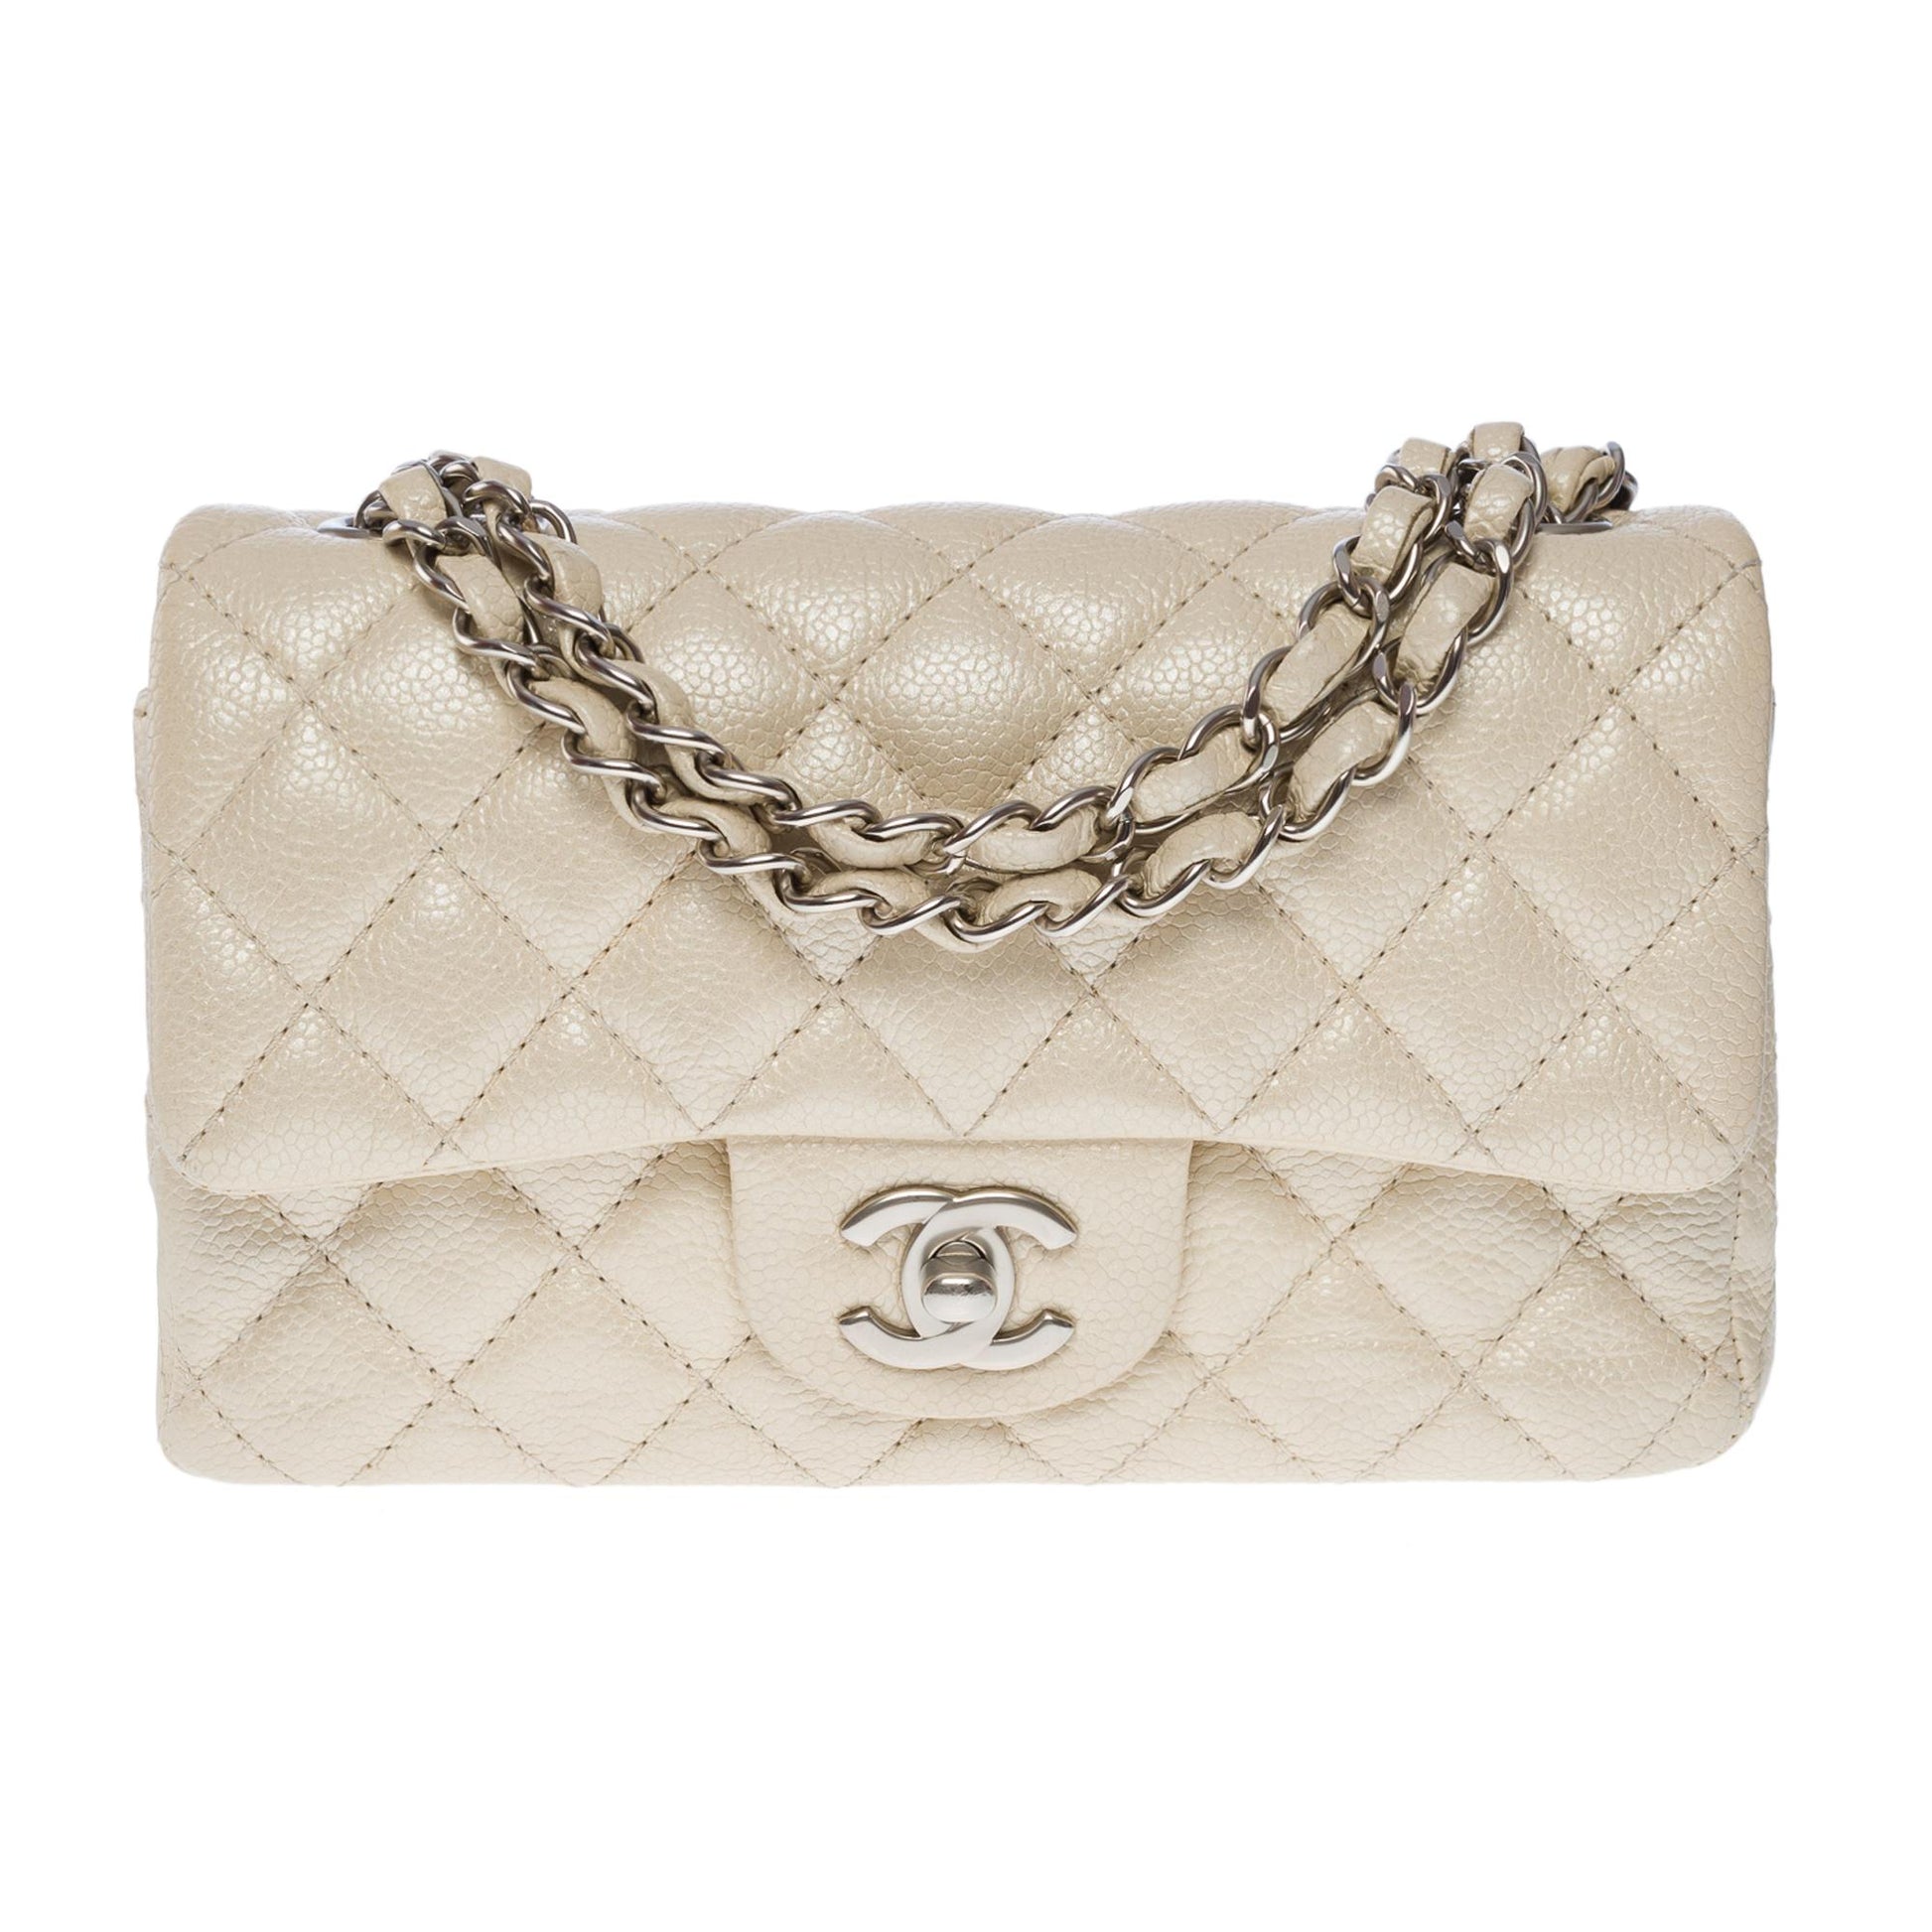 CHANEL YELLOW TWEED MEDIUM CLASSIC DOUBLE FLAP BAG WITH CHAMPAGNE GOLD -  The Edit LDN